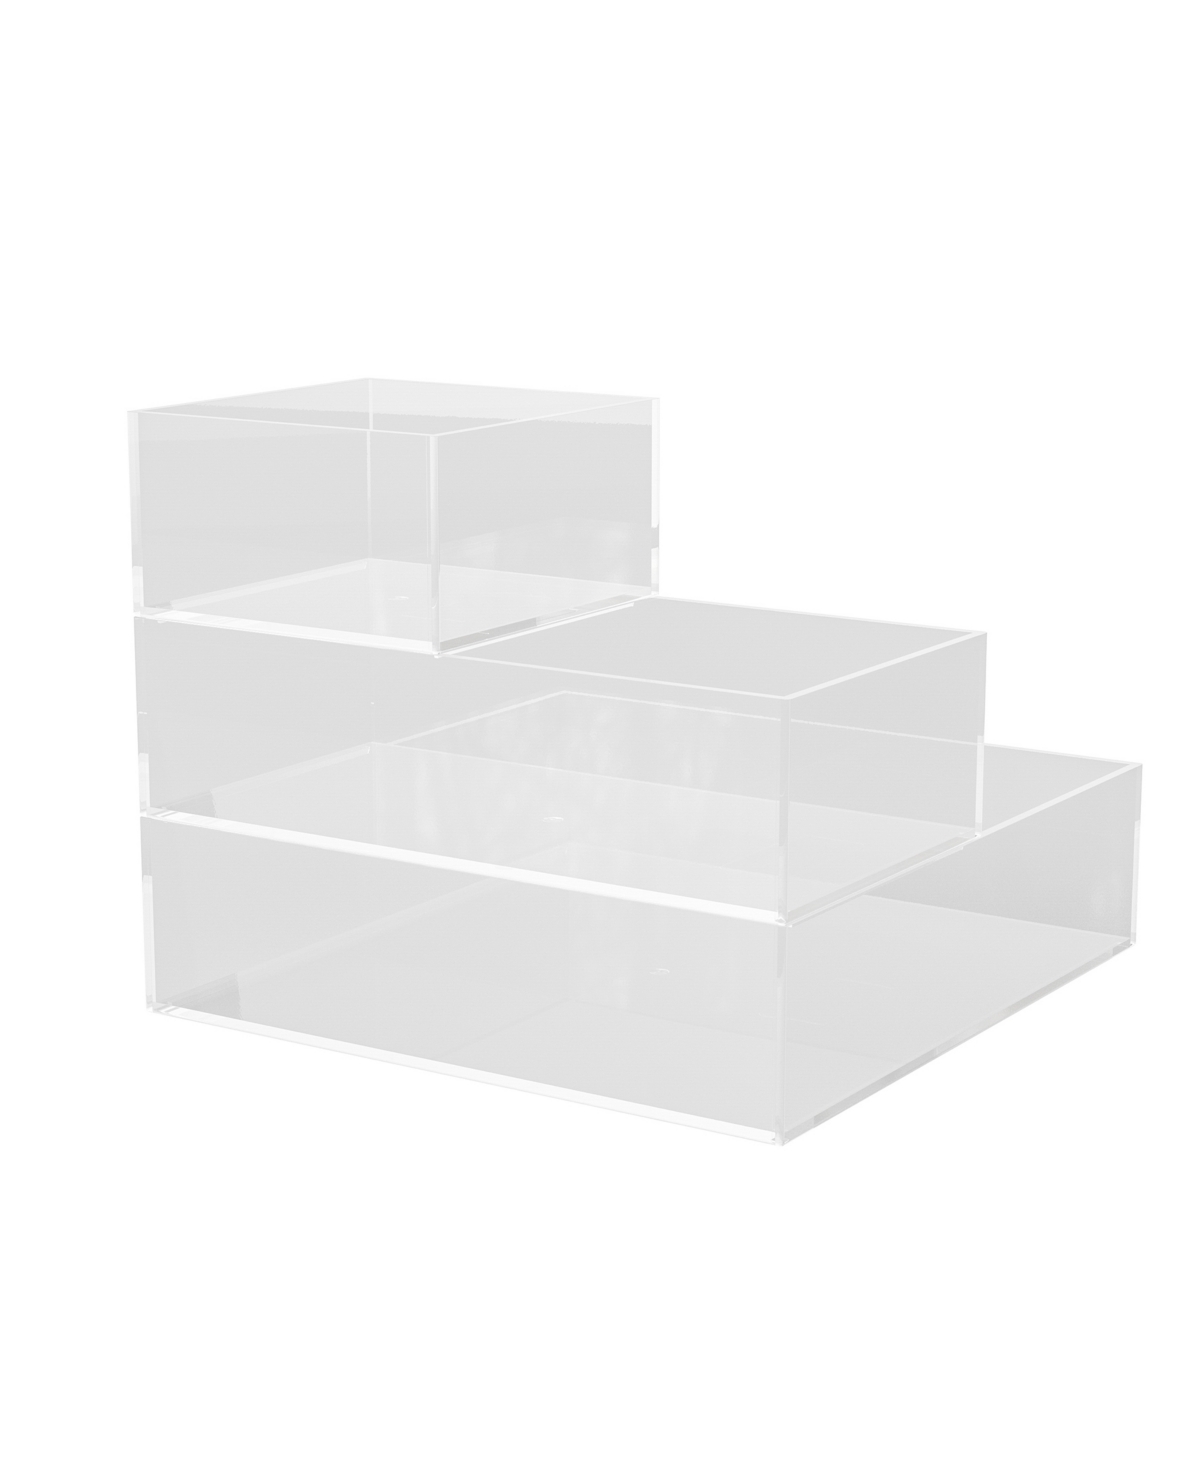 Brody Plastic Storage Organizer Bins with Engineered Wood Lids for Home Office or Kitchen, 3 Pack Small, Medium, Large - Clear, White